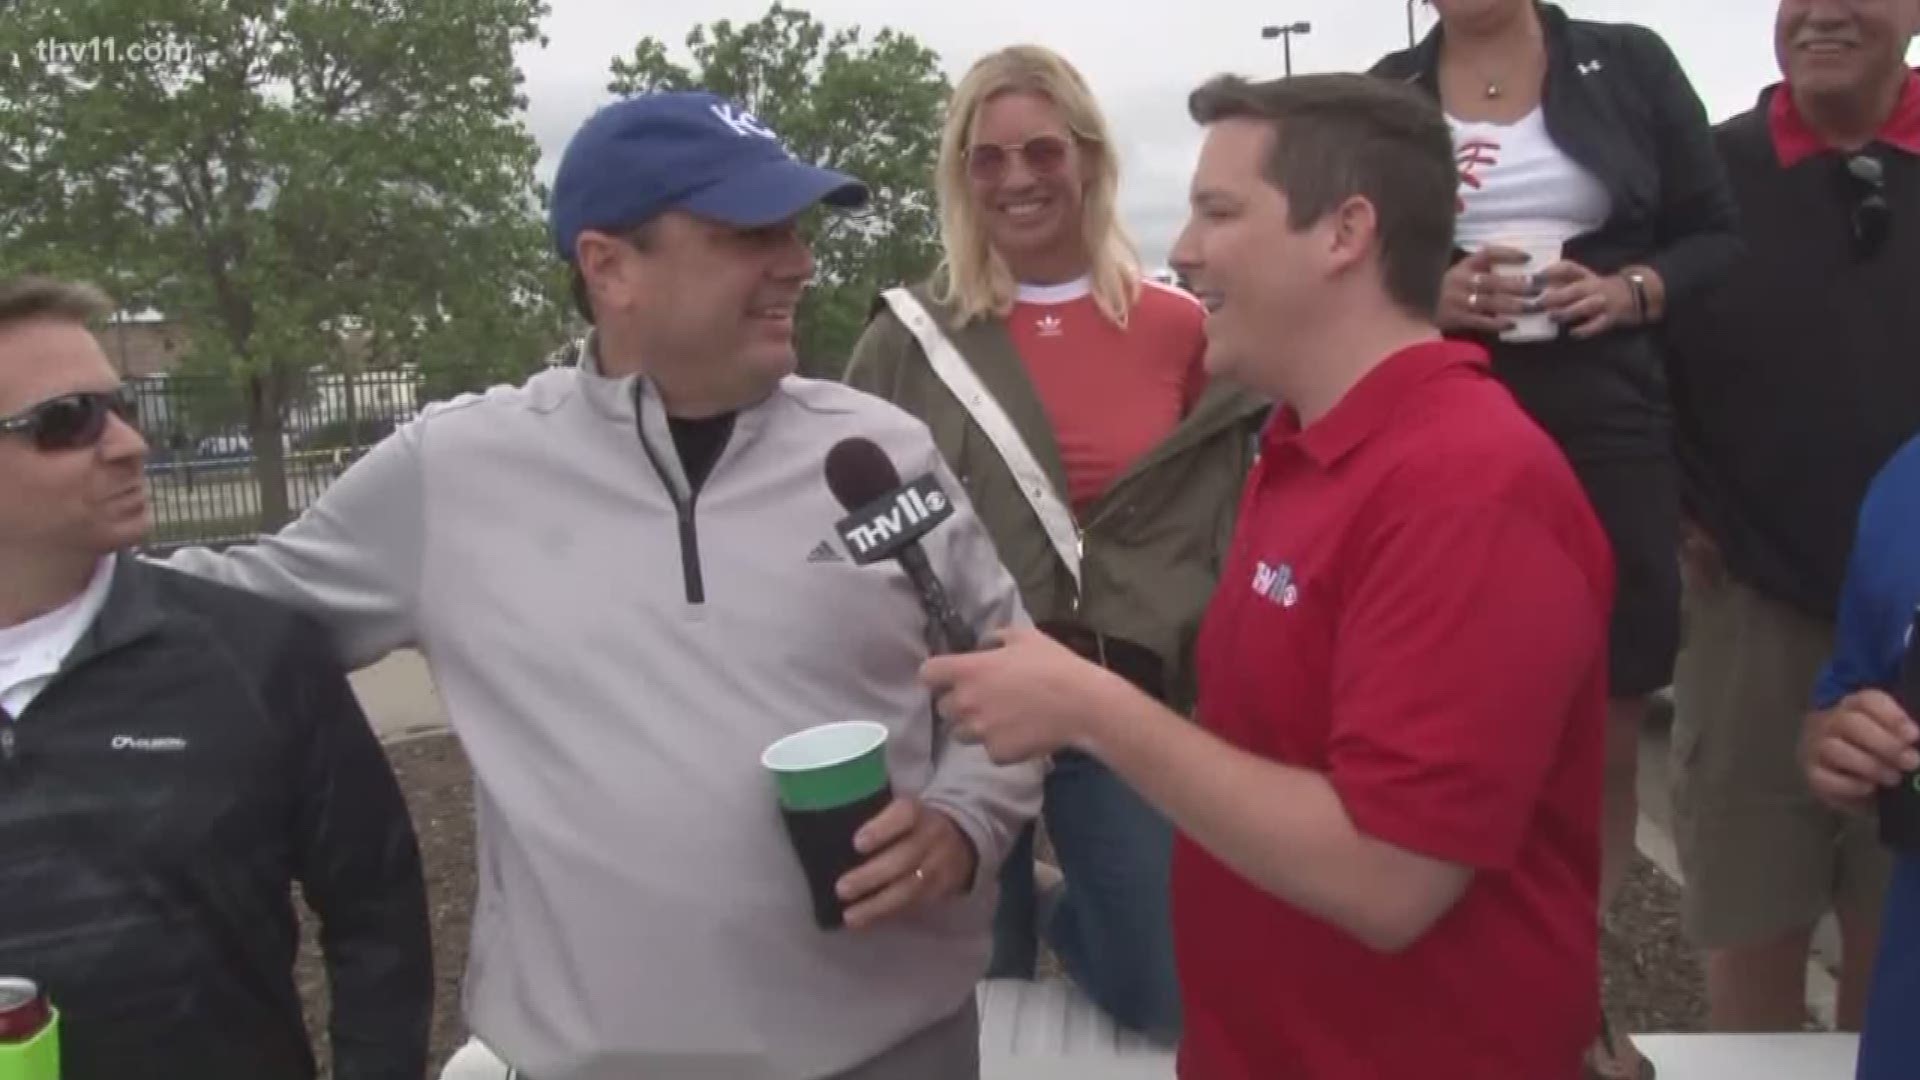 Hayden Balgavy tailgates with fans ahead of Florida game